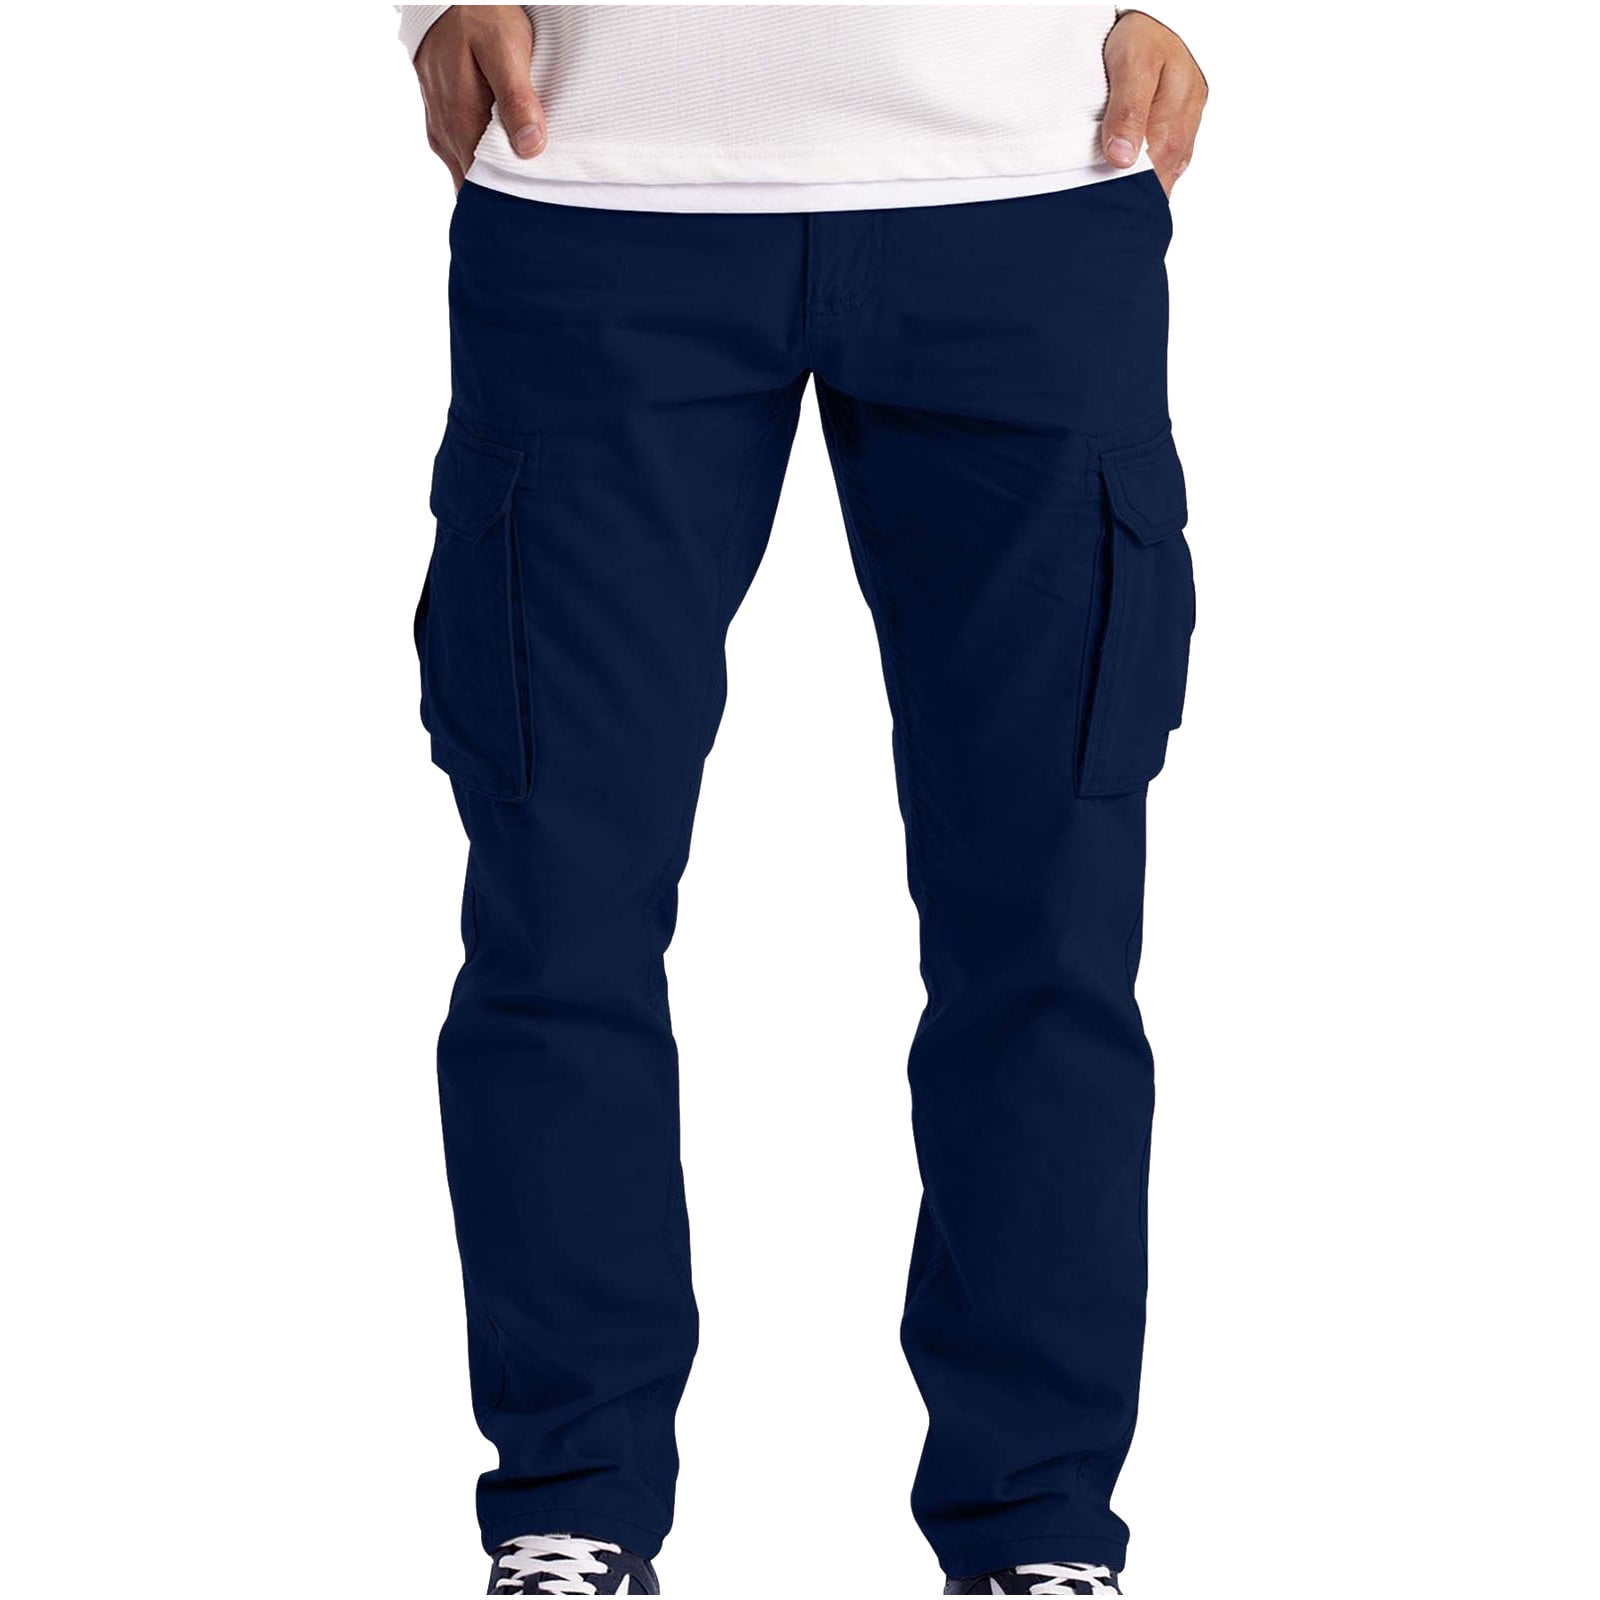 Cargo Pants Plus Size Solid Color Softy Work Pants for Men Mid